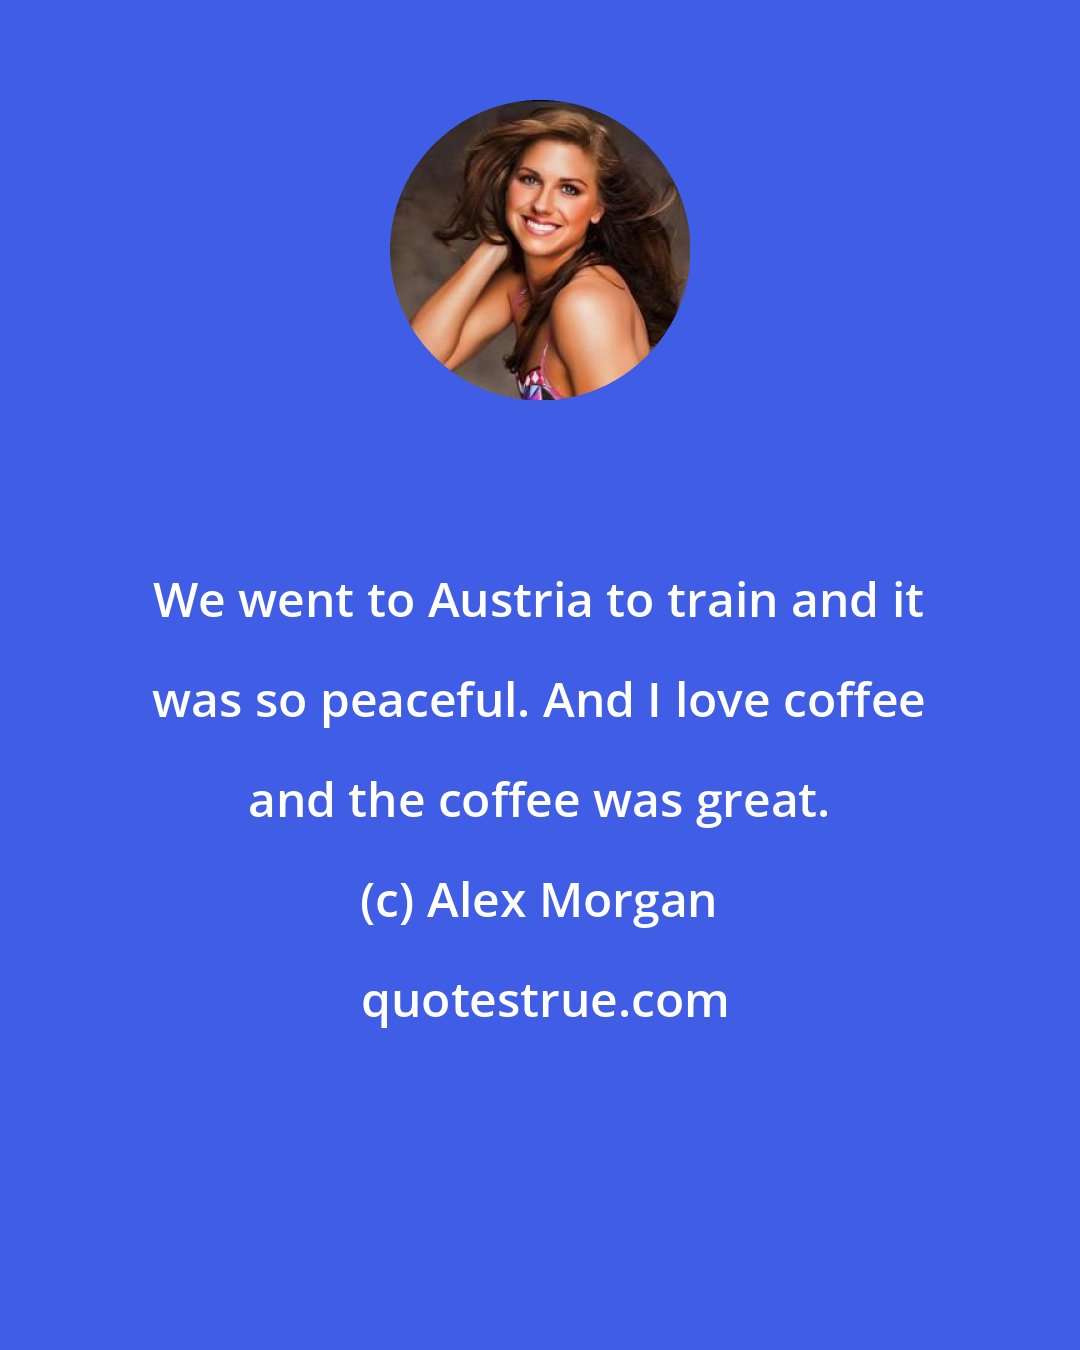 Alex Morgan: We went to Austria to train and it was so peaceful. And I love coffee and the coffee was great.